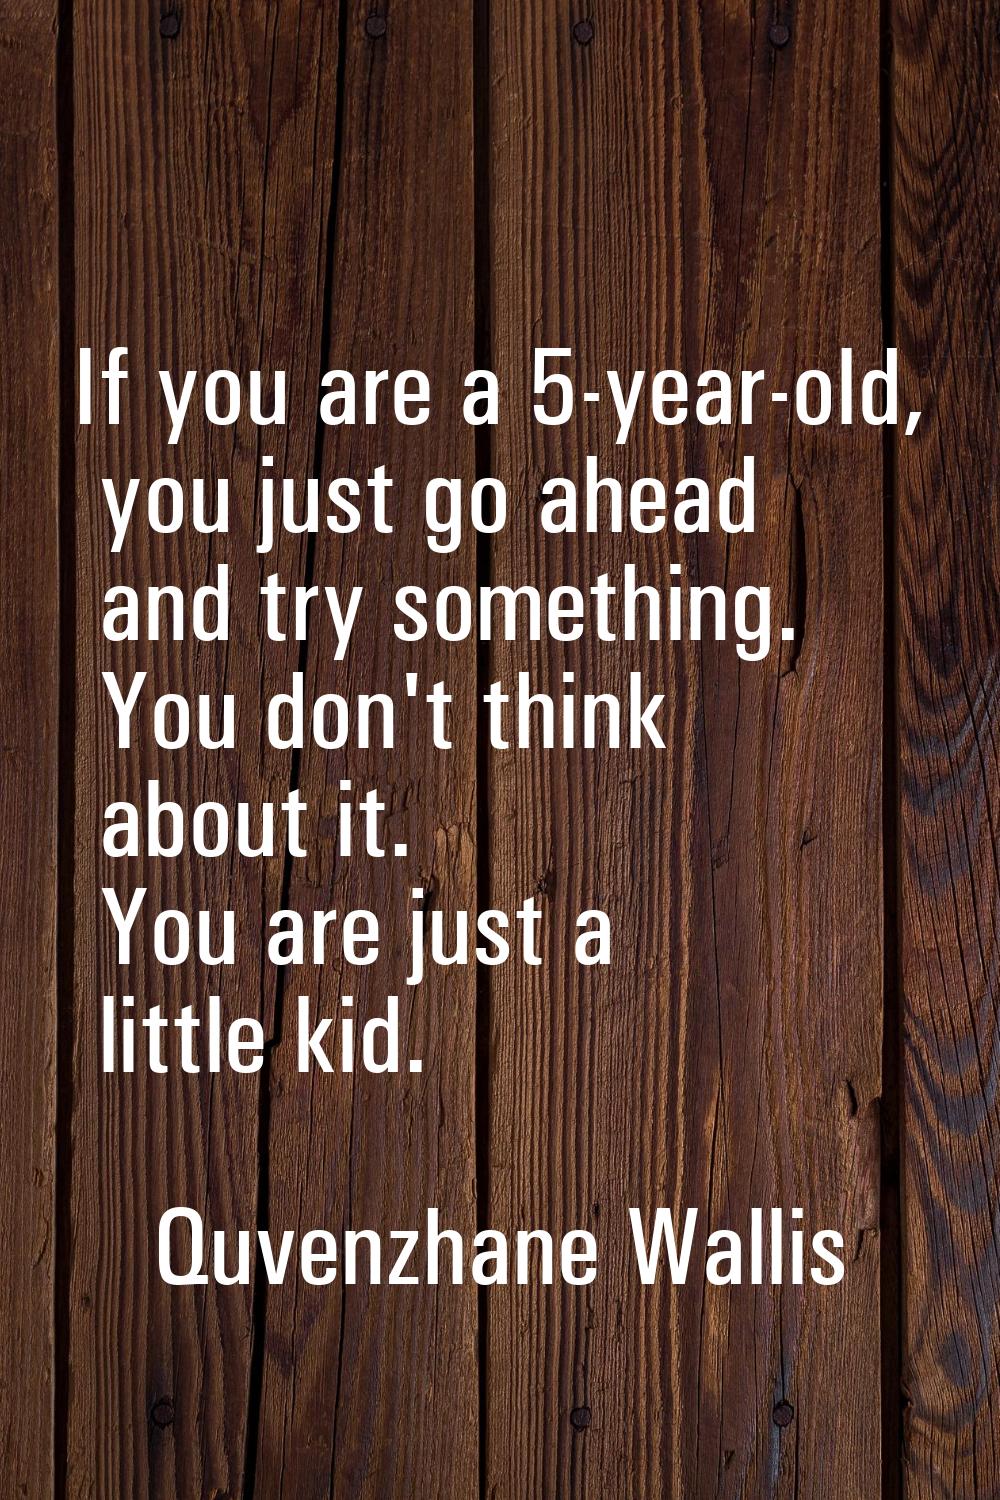 If you are a 5-year-old, you just go ahead and try something. You don't think about it. You are jus